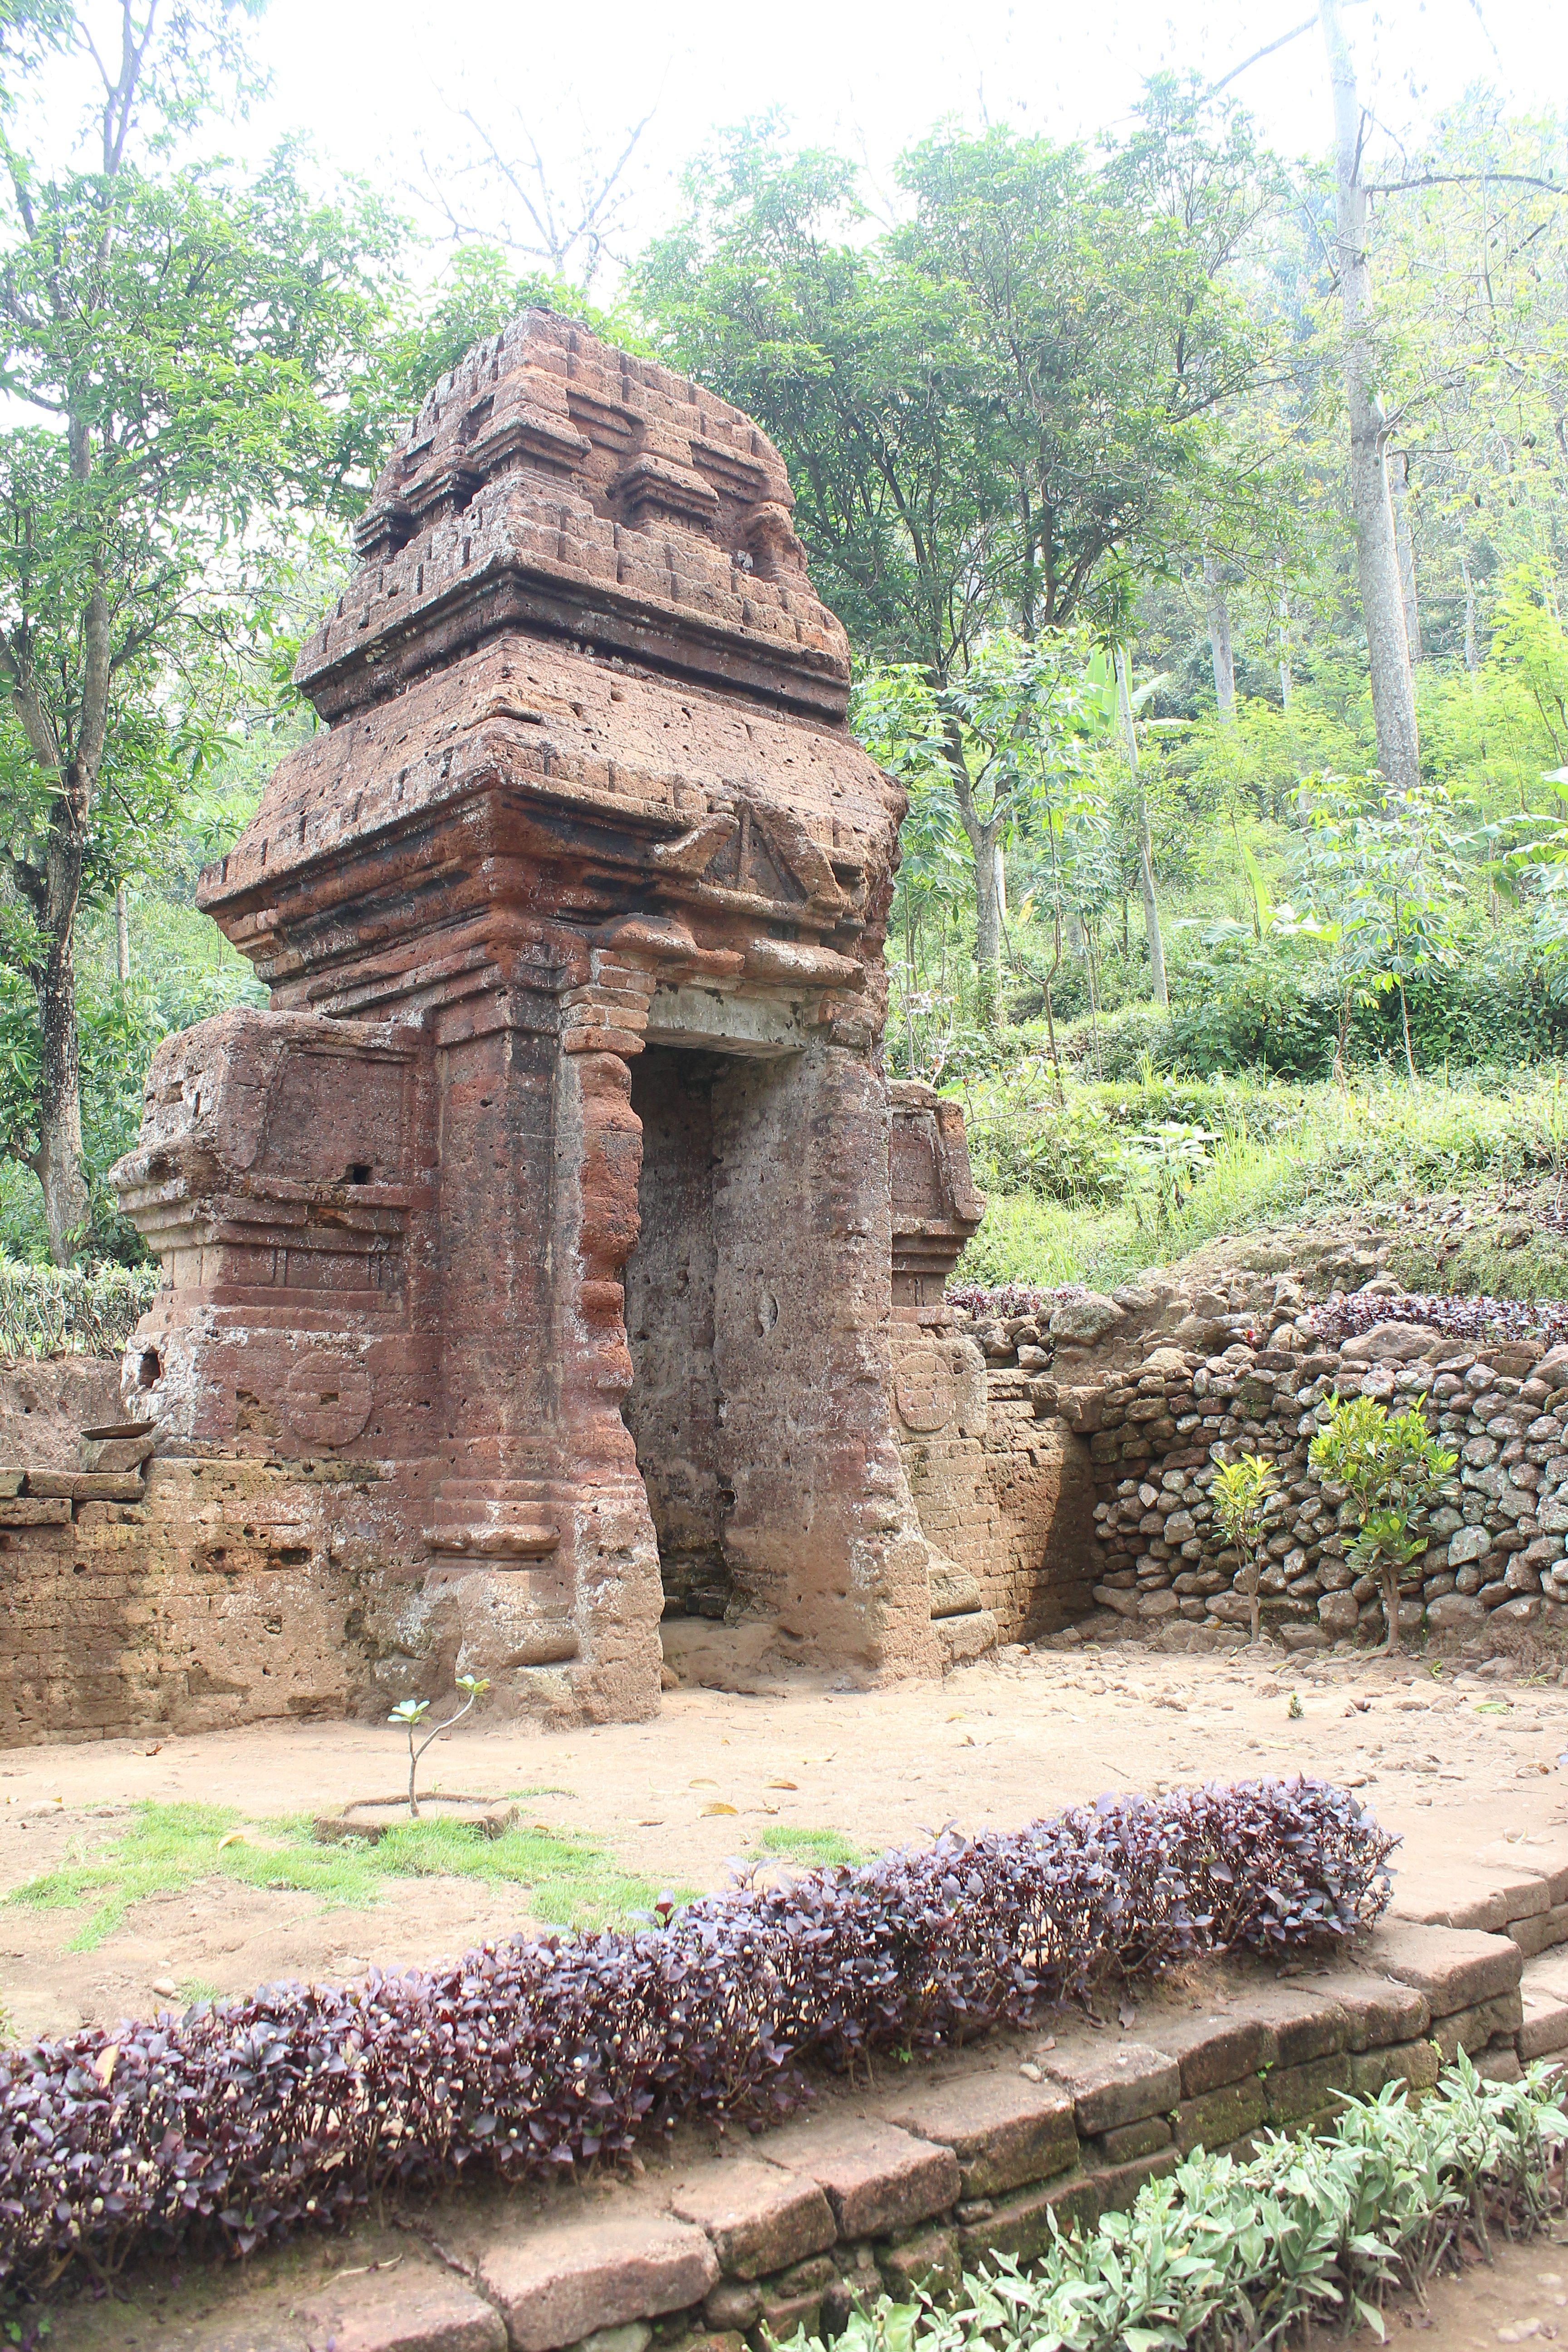 Remains of brick gate in the jungle